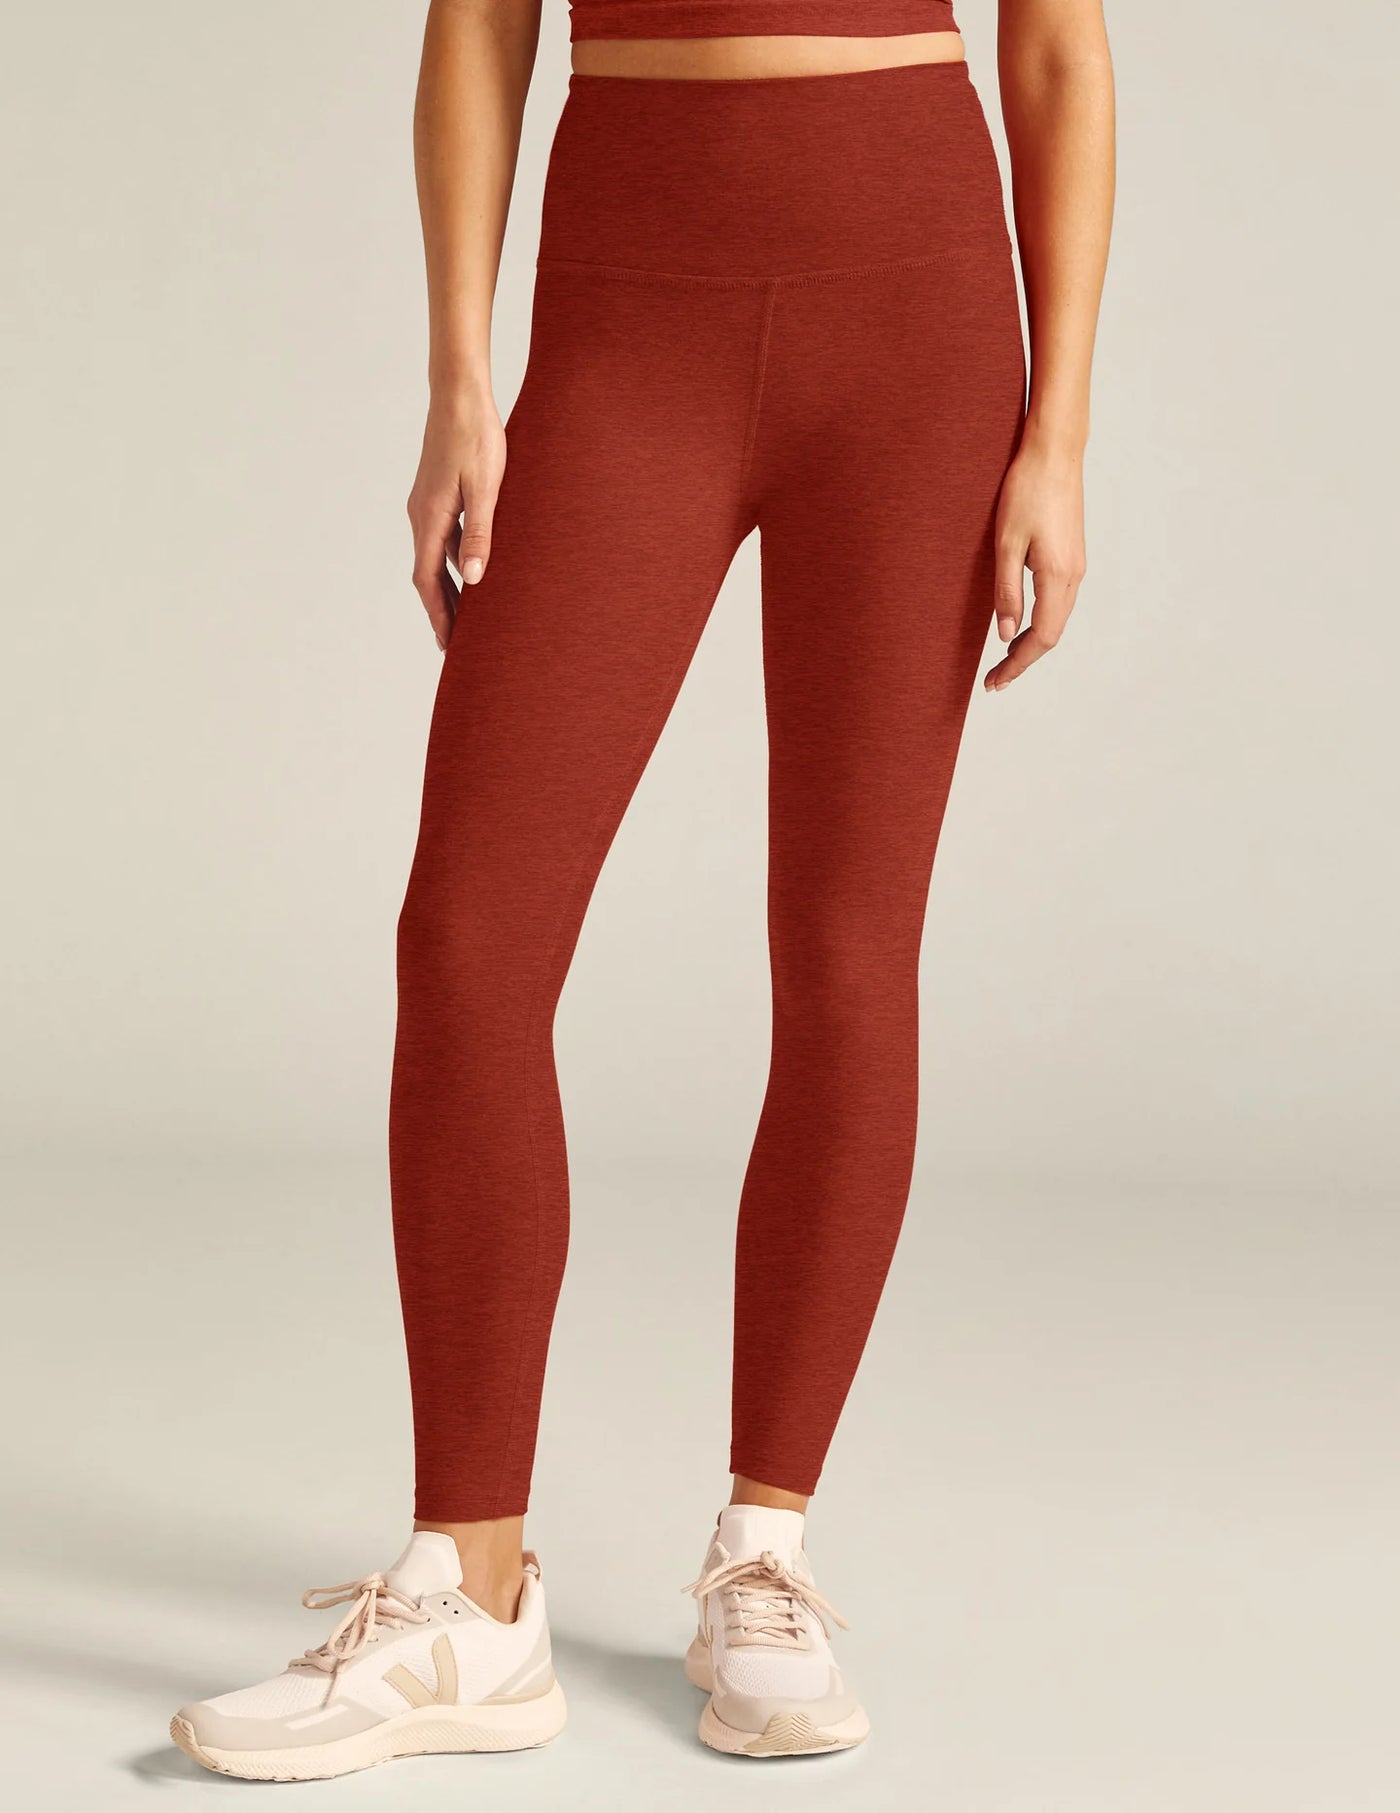 These high-waisted leggings are an  bestseller and shoppers